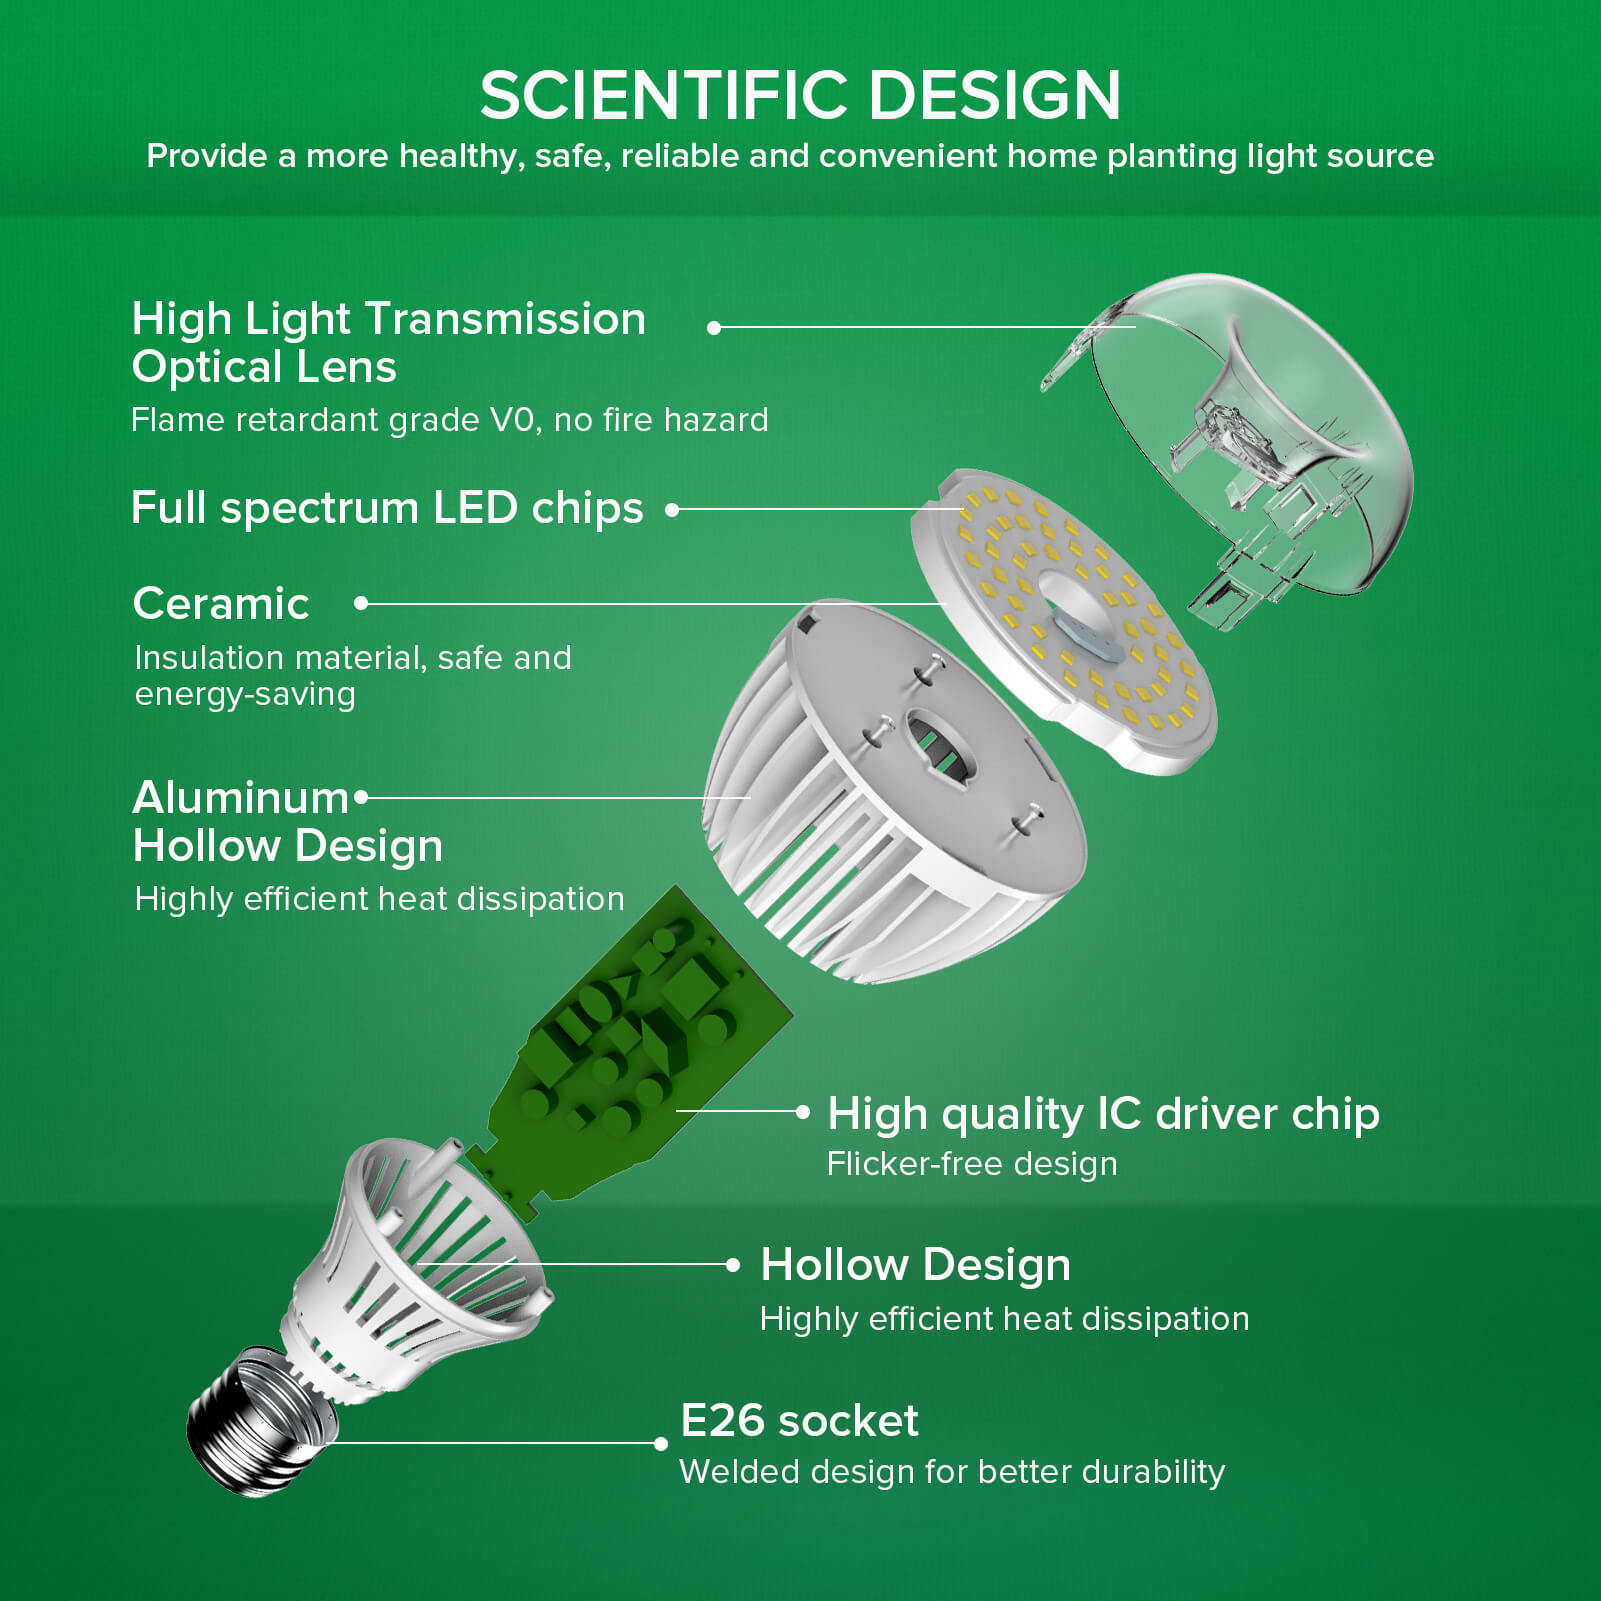 SCIENTIFIC DESIGN：Provide a more healthy, safe, reliable and convenient home planting light source